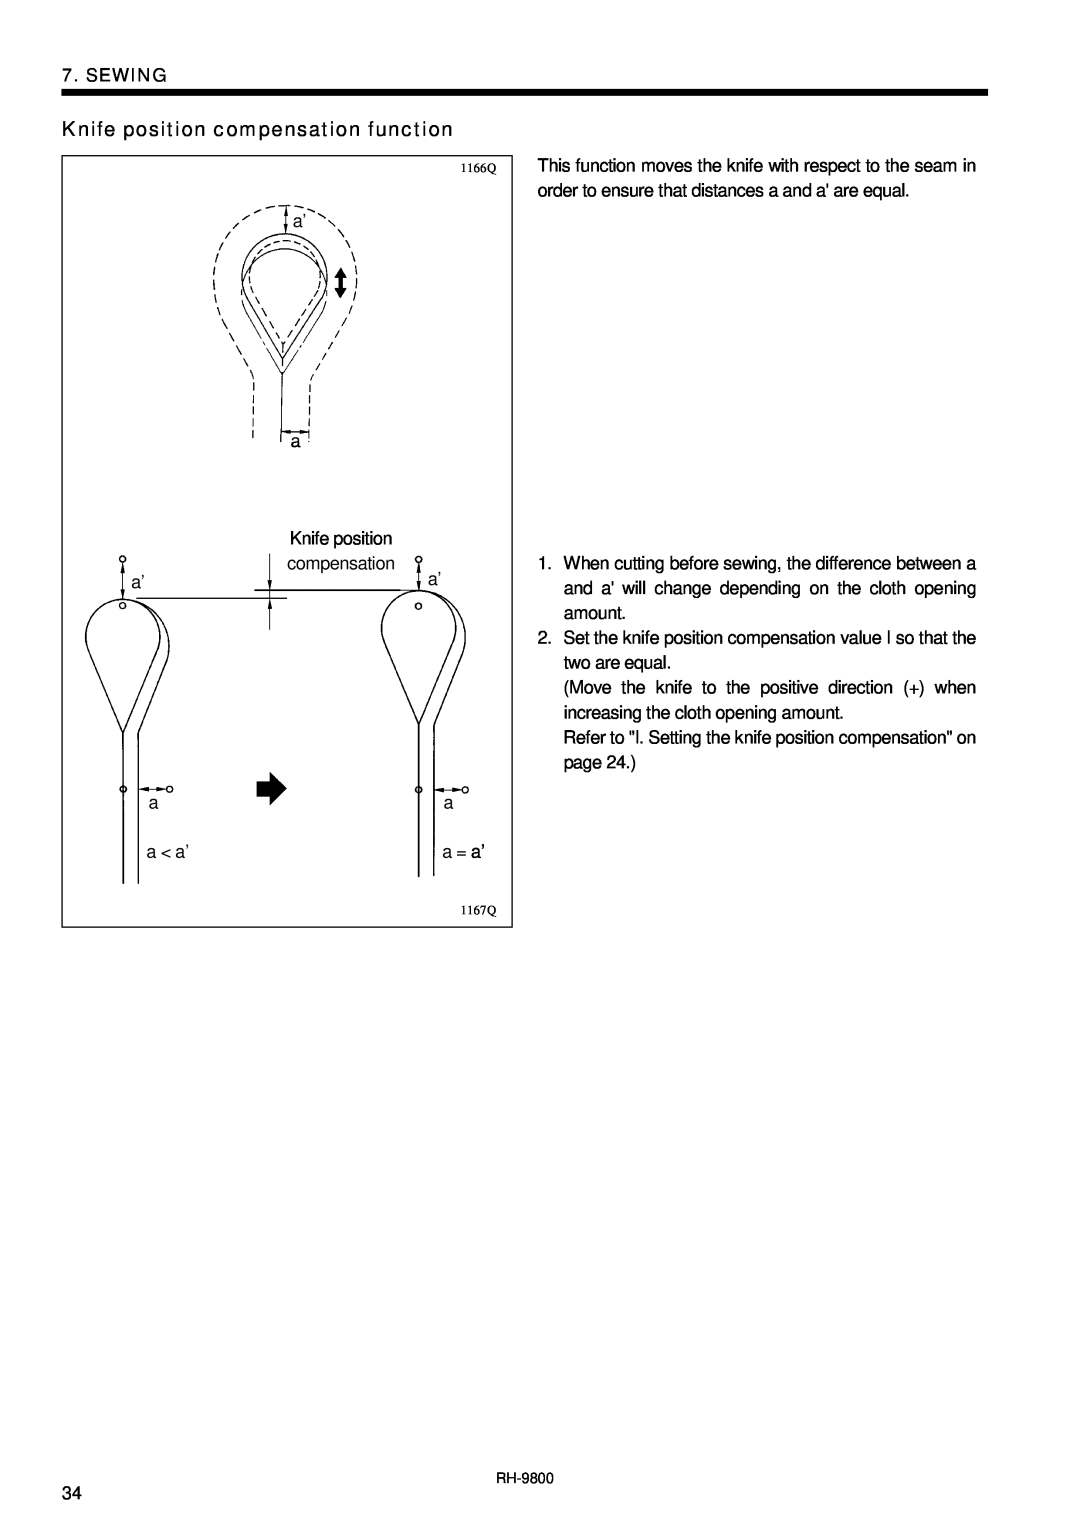 Brother DH4-B980 instruction manual Knife position compensation function, Sewing 